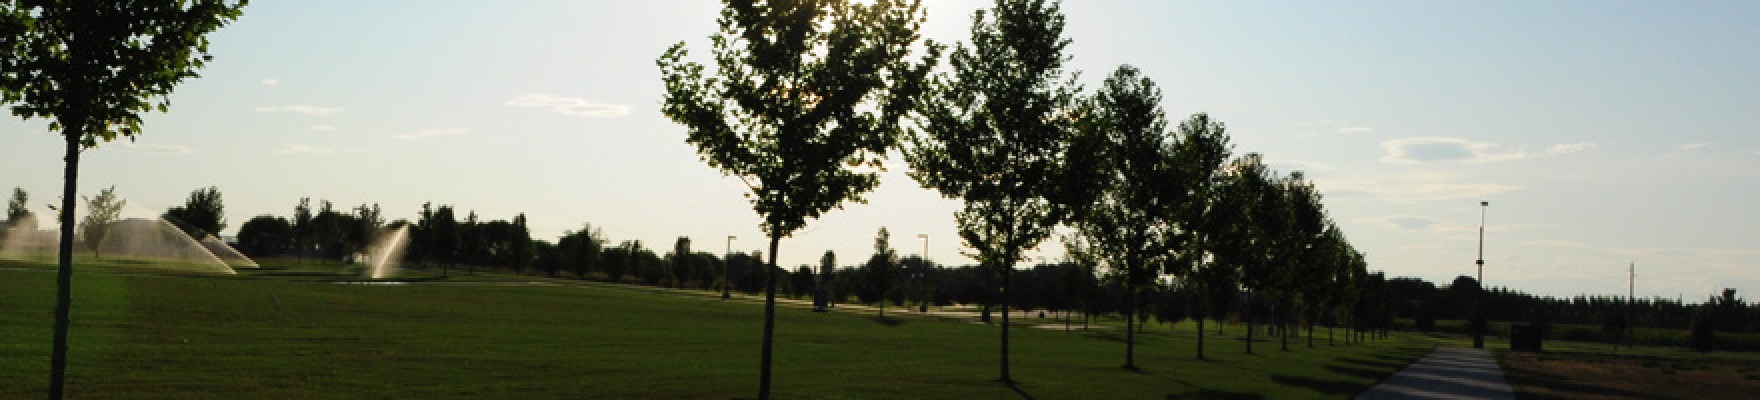 View of grassy field with row of trees.